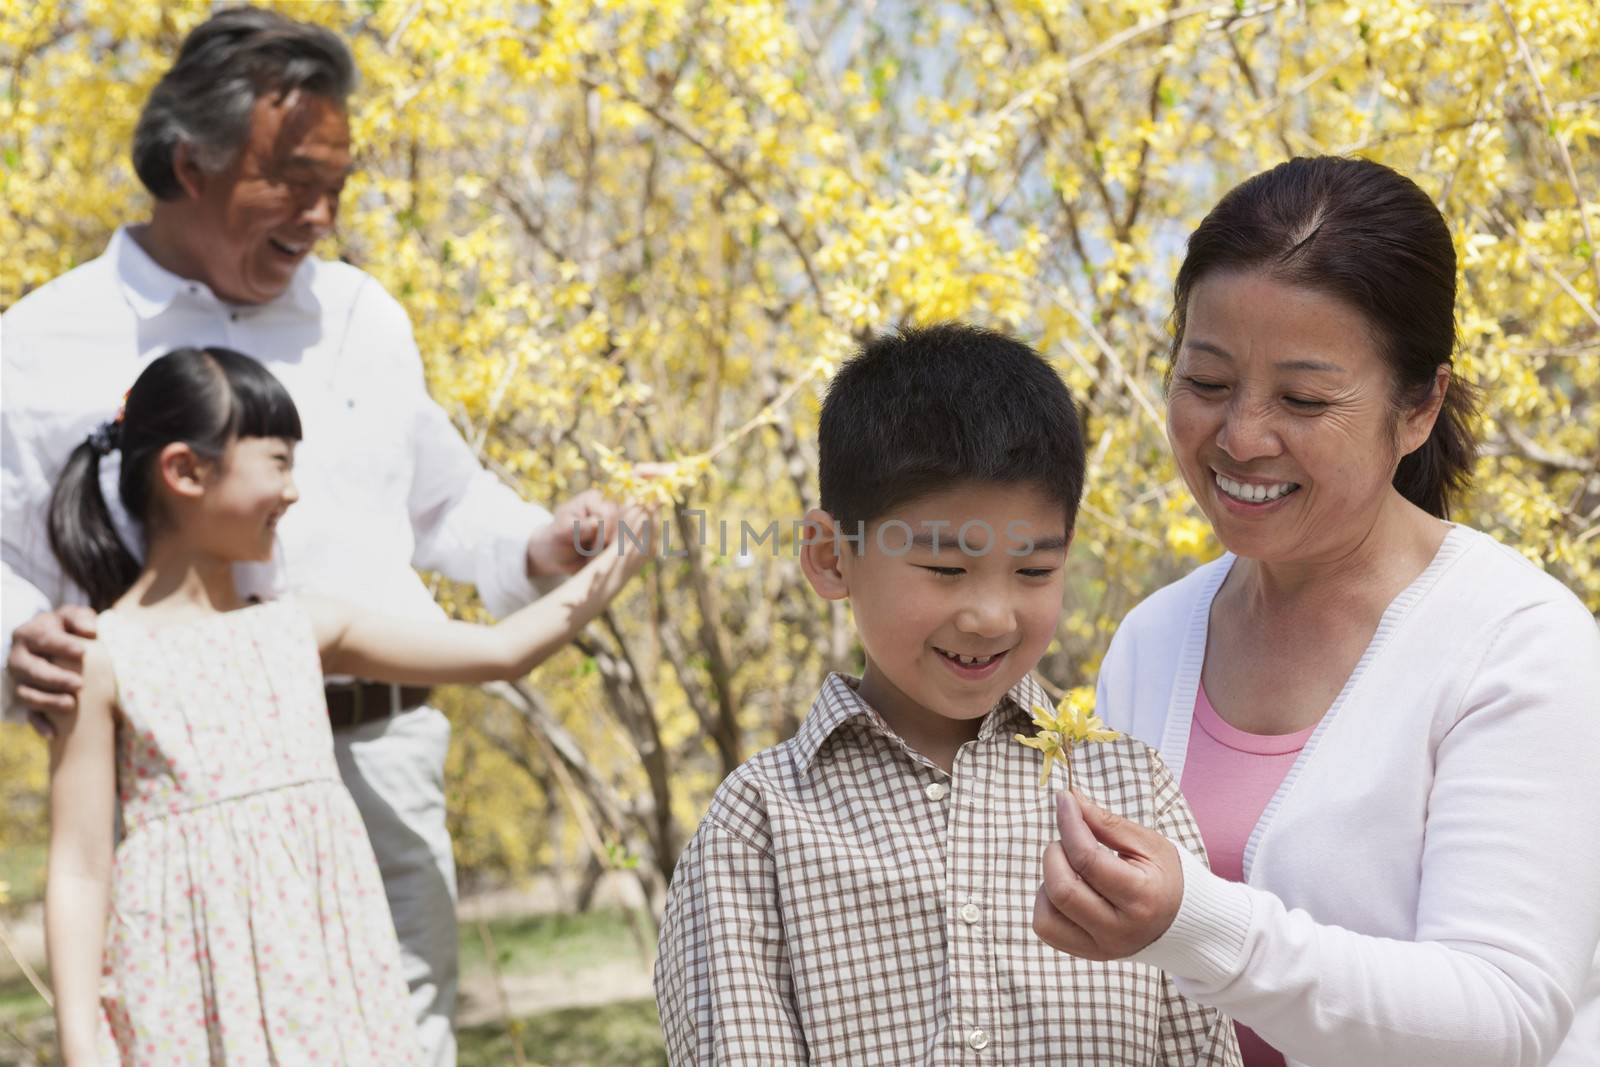 Happy, smiling grandparents and grandchildren in the park in springtime looking at flower blossoms by XiXinXing